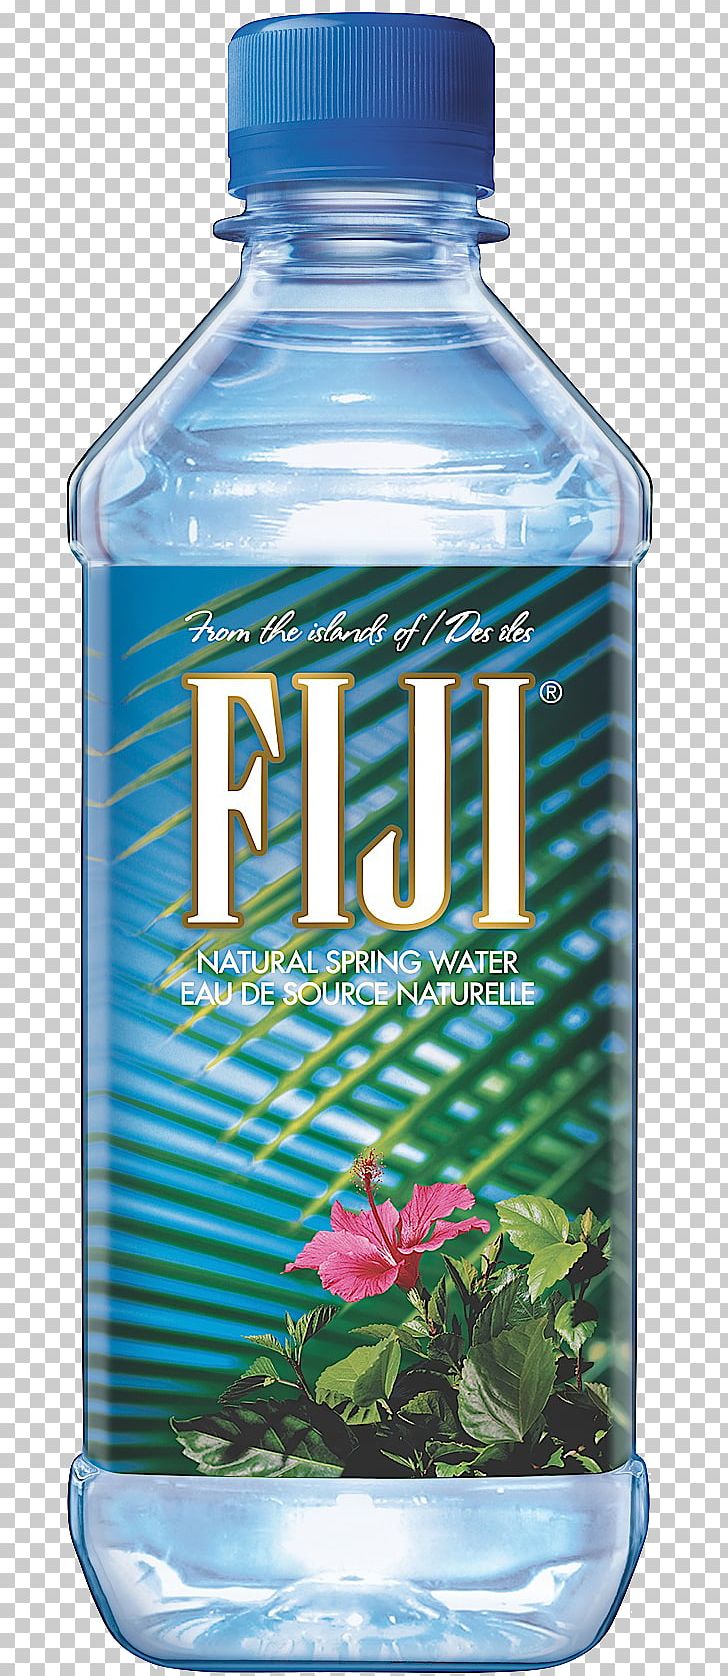 Fiji Water Bottled Water Distilled Water PNG, Clipart, Artesian Aquifer, Bottle, Bottled Water, Distilled Water, Drink Free PNG Download